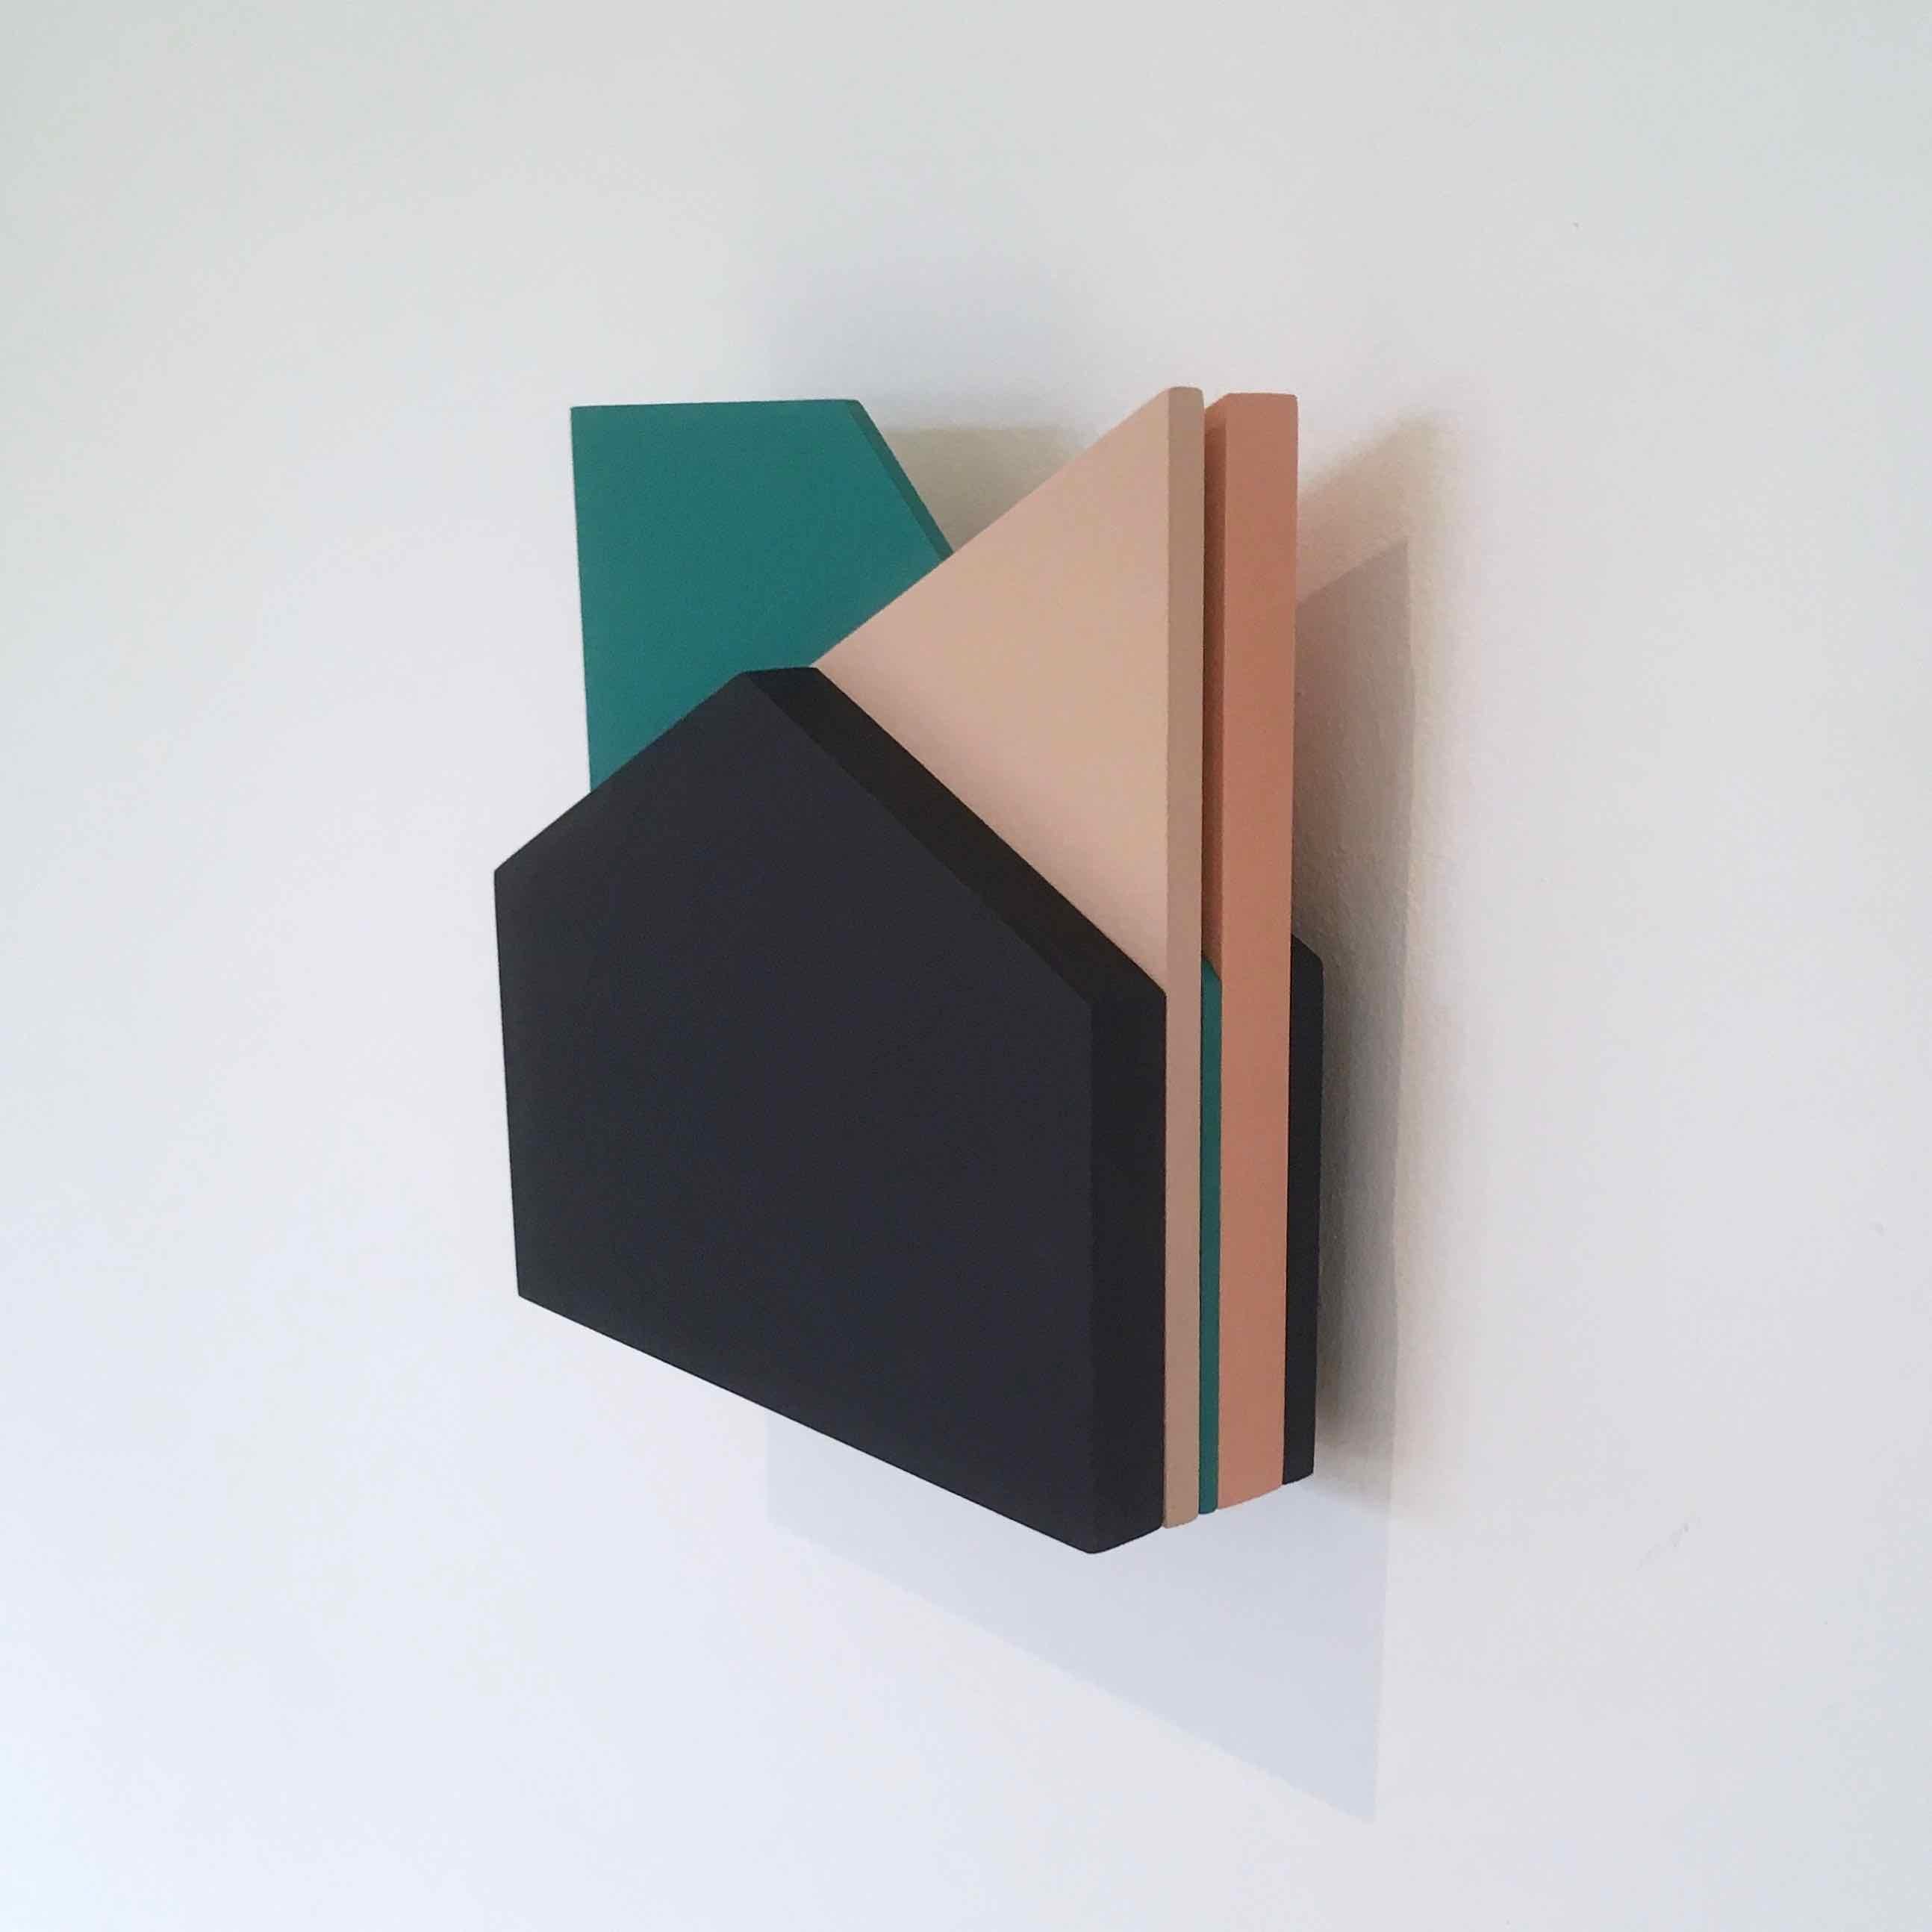 Perspective Study 006, 2019, Wooden board and paint, 5 1/2 × 5 1/2 × 1 3/5 in, 14 × 14 × 4 cm by Laura Jane Scott

Laura Jane Scott’s desire for formal simplicity through geometric form and striking use of colour has enabled her to produce a body of